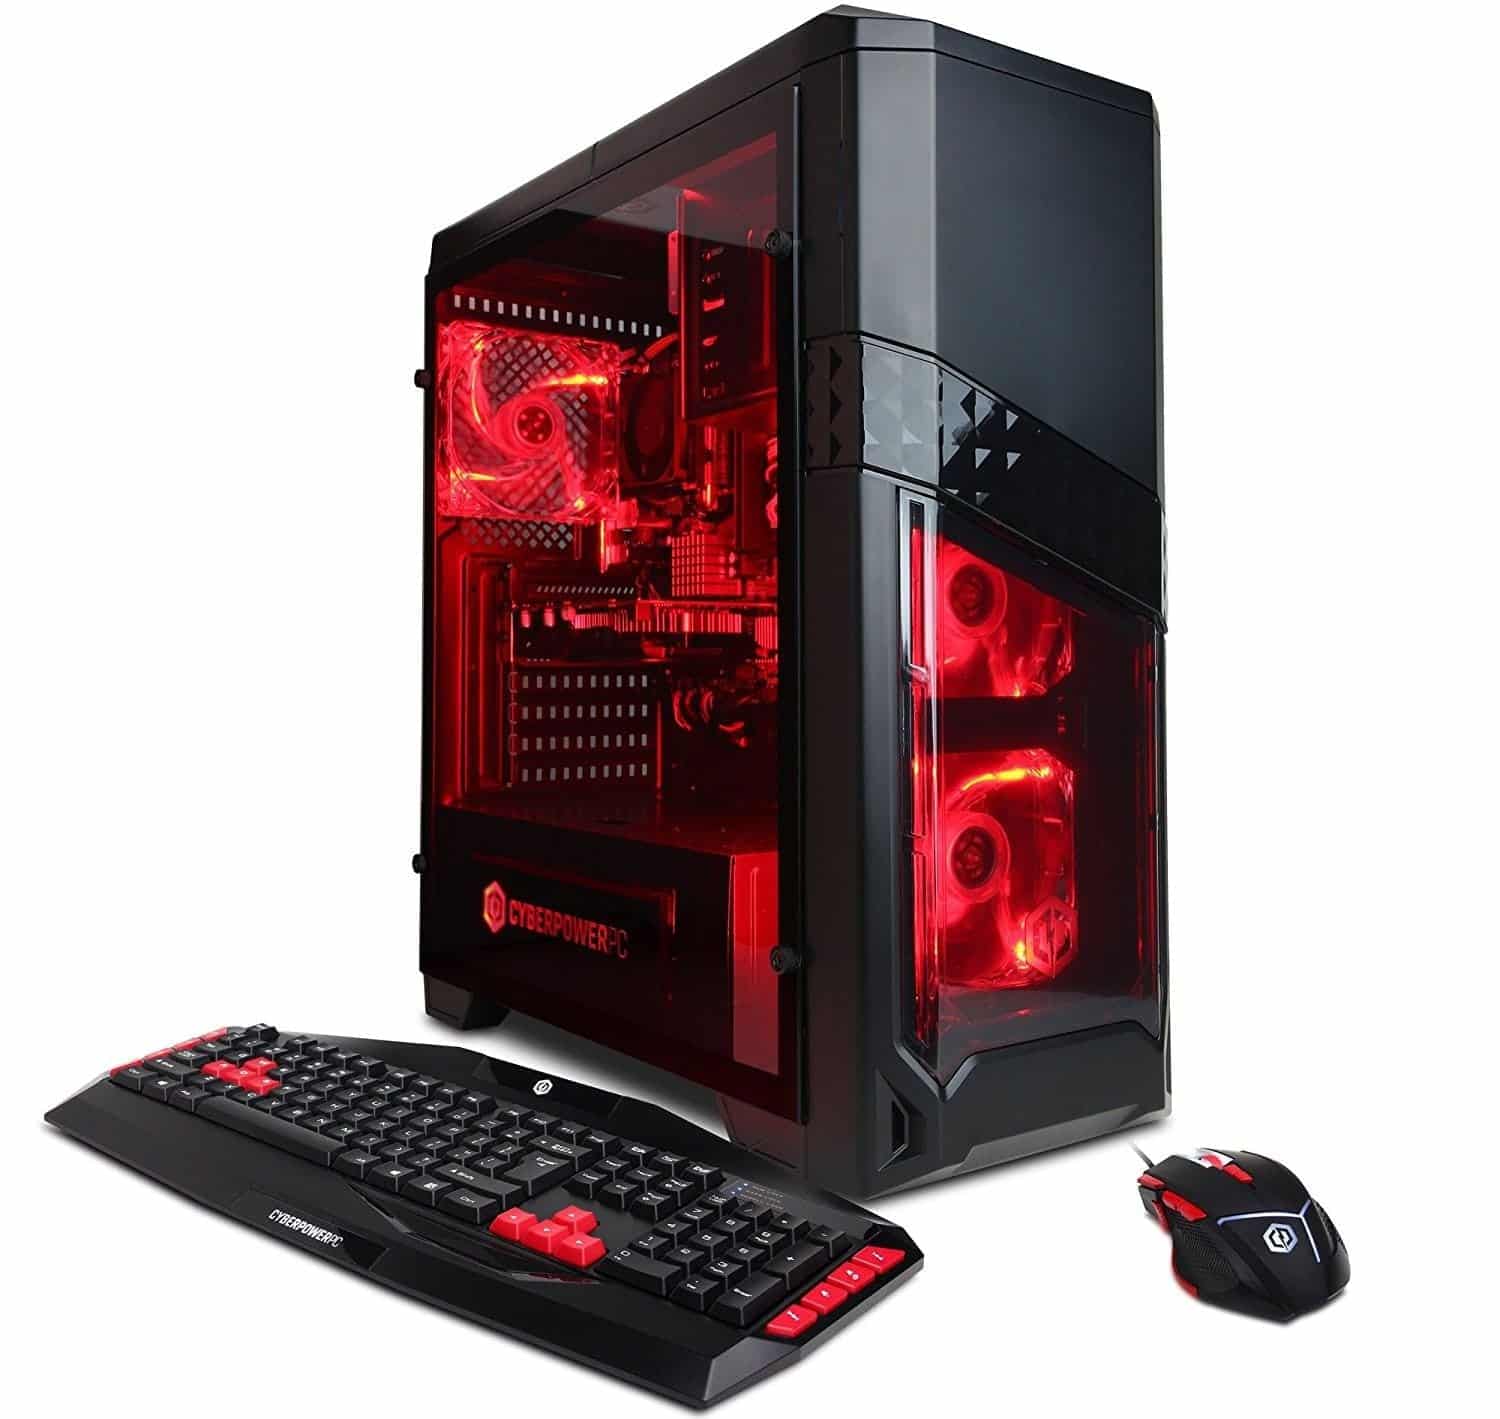 Minimalist Best Gaming Pc Australia Under 1000 with Wall Mounted Monitor